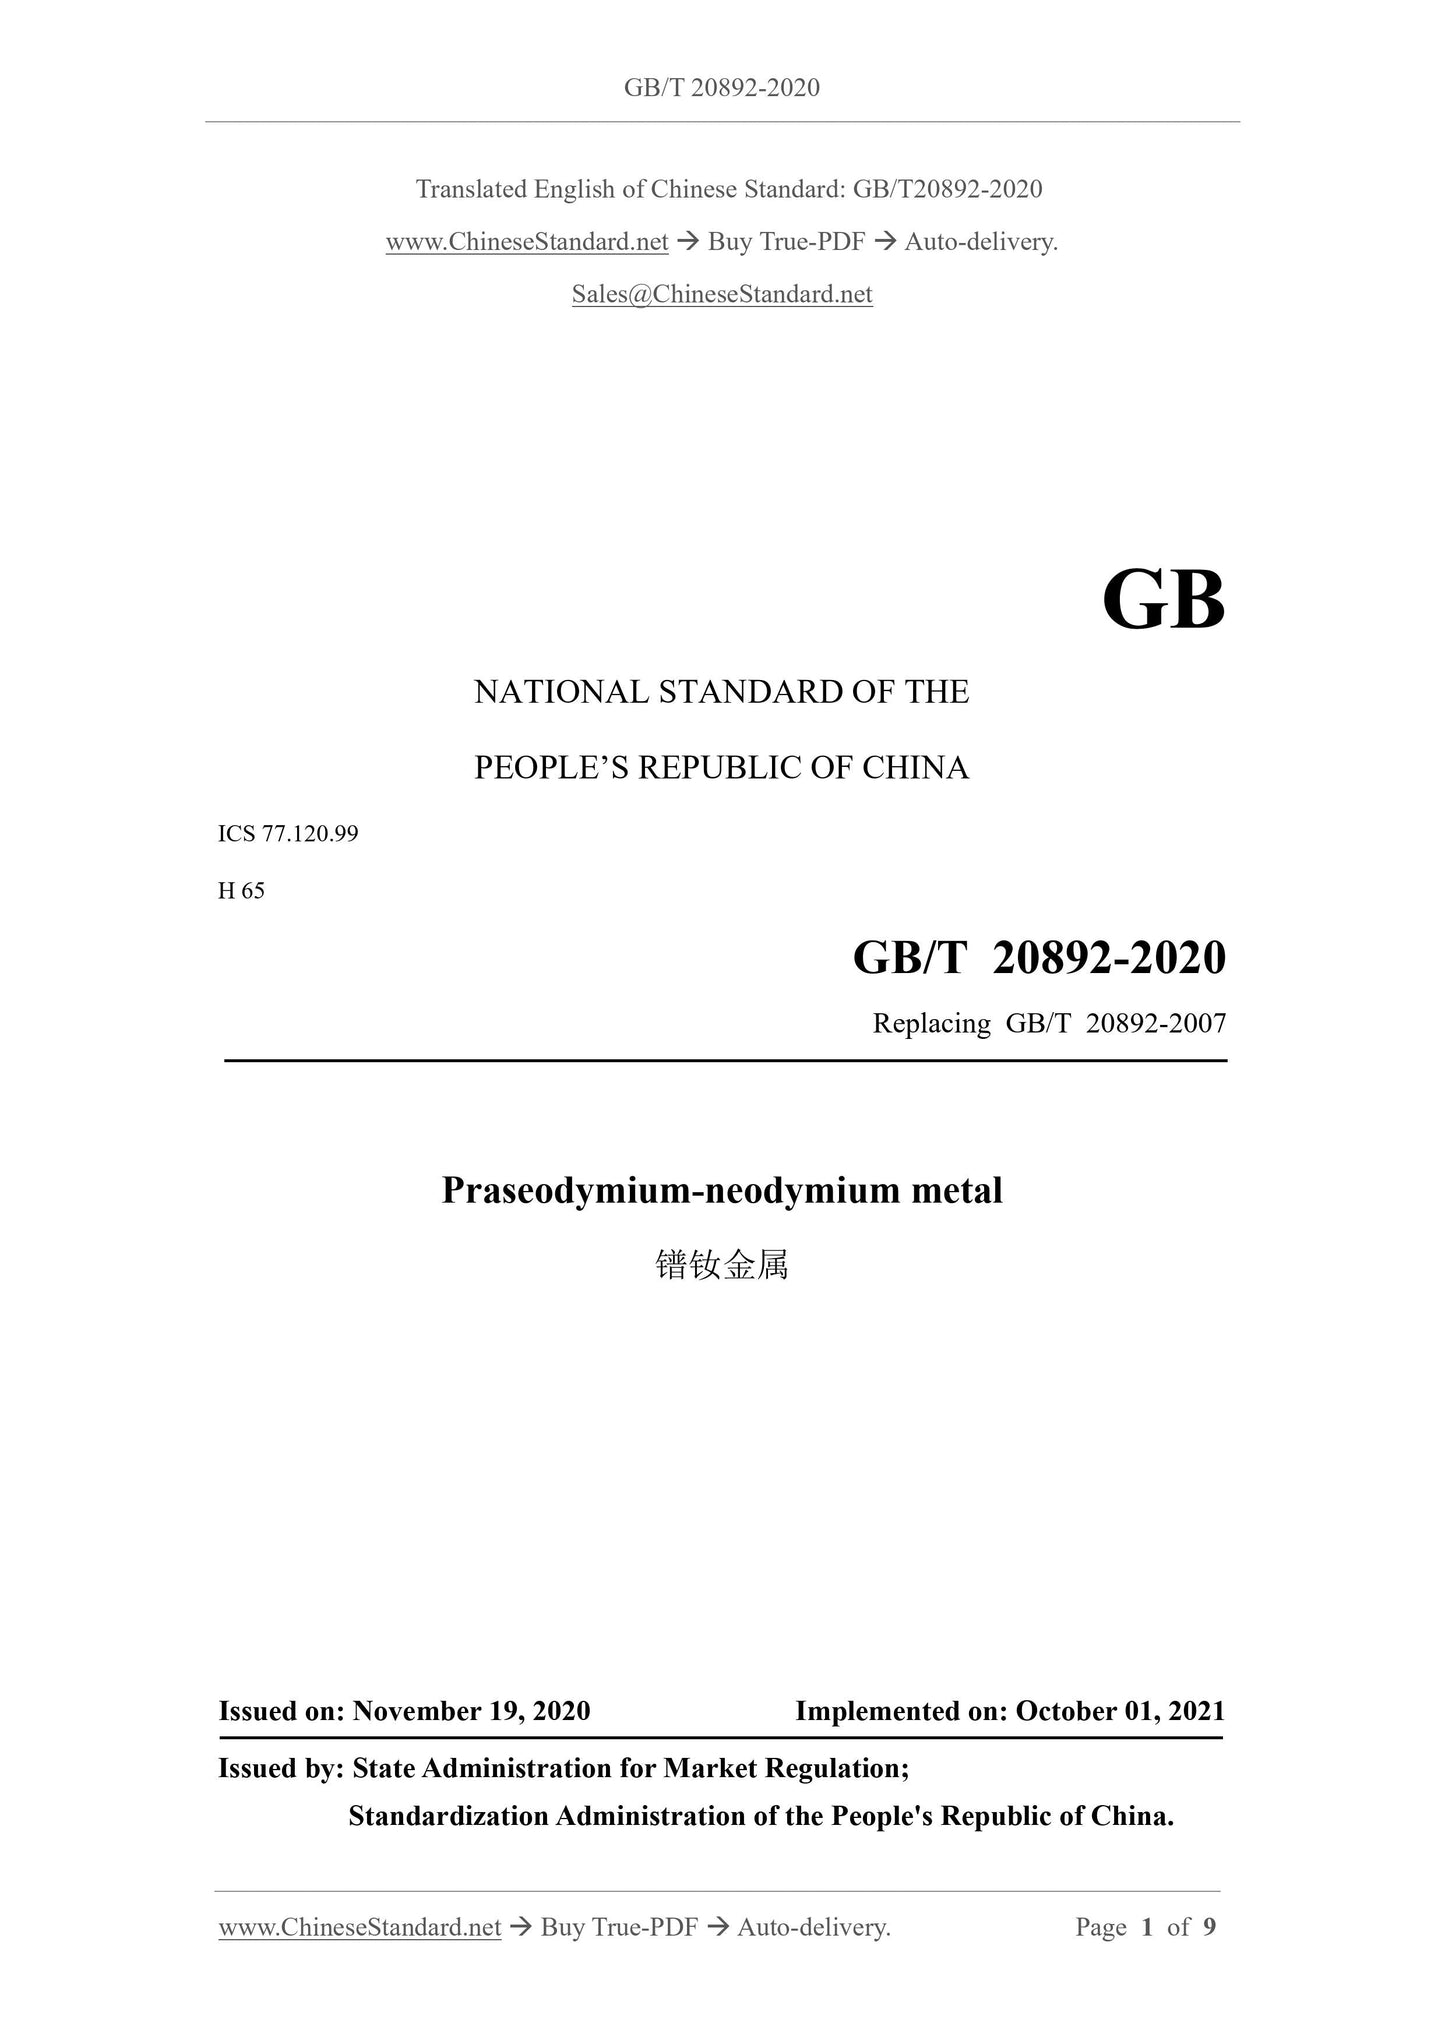 GB/T 20892-2020 Page 1